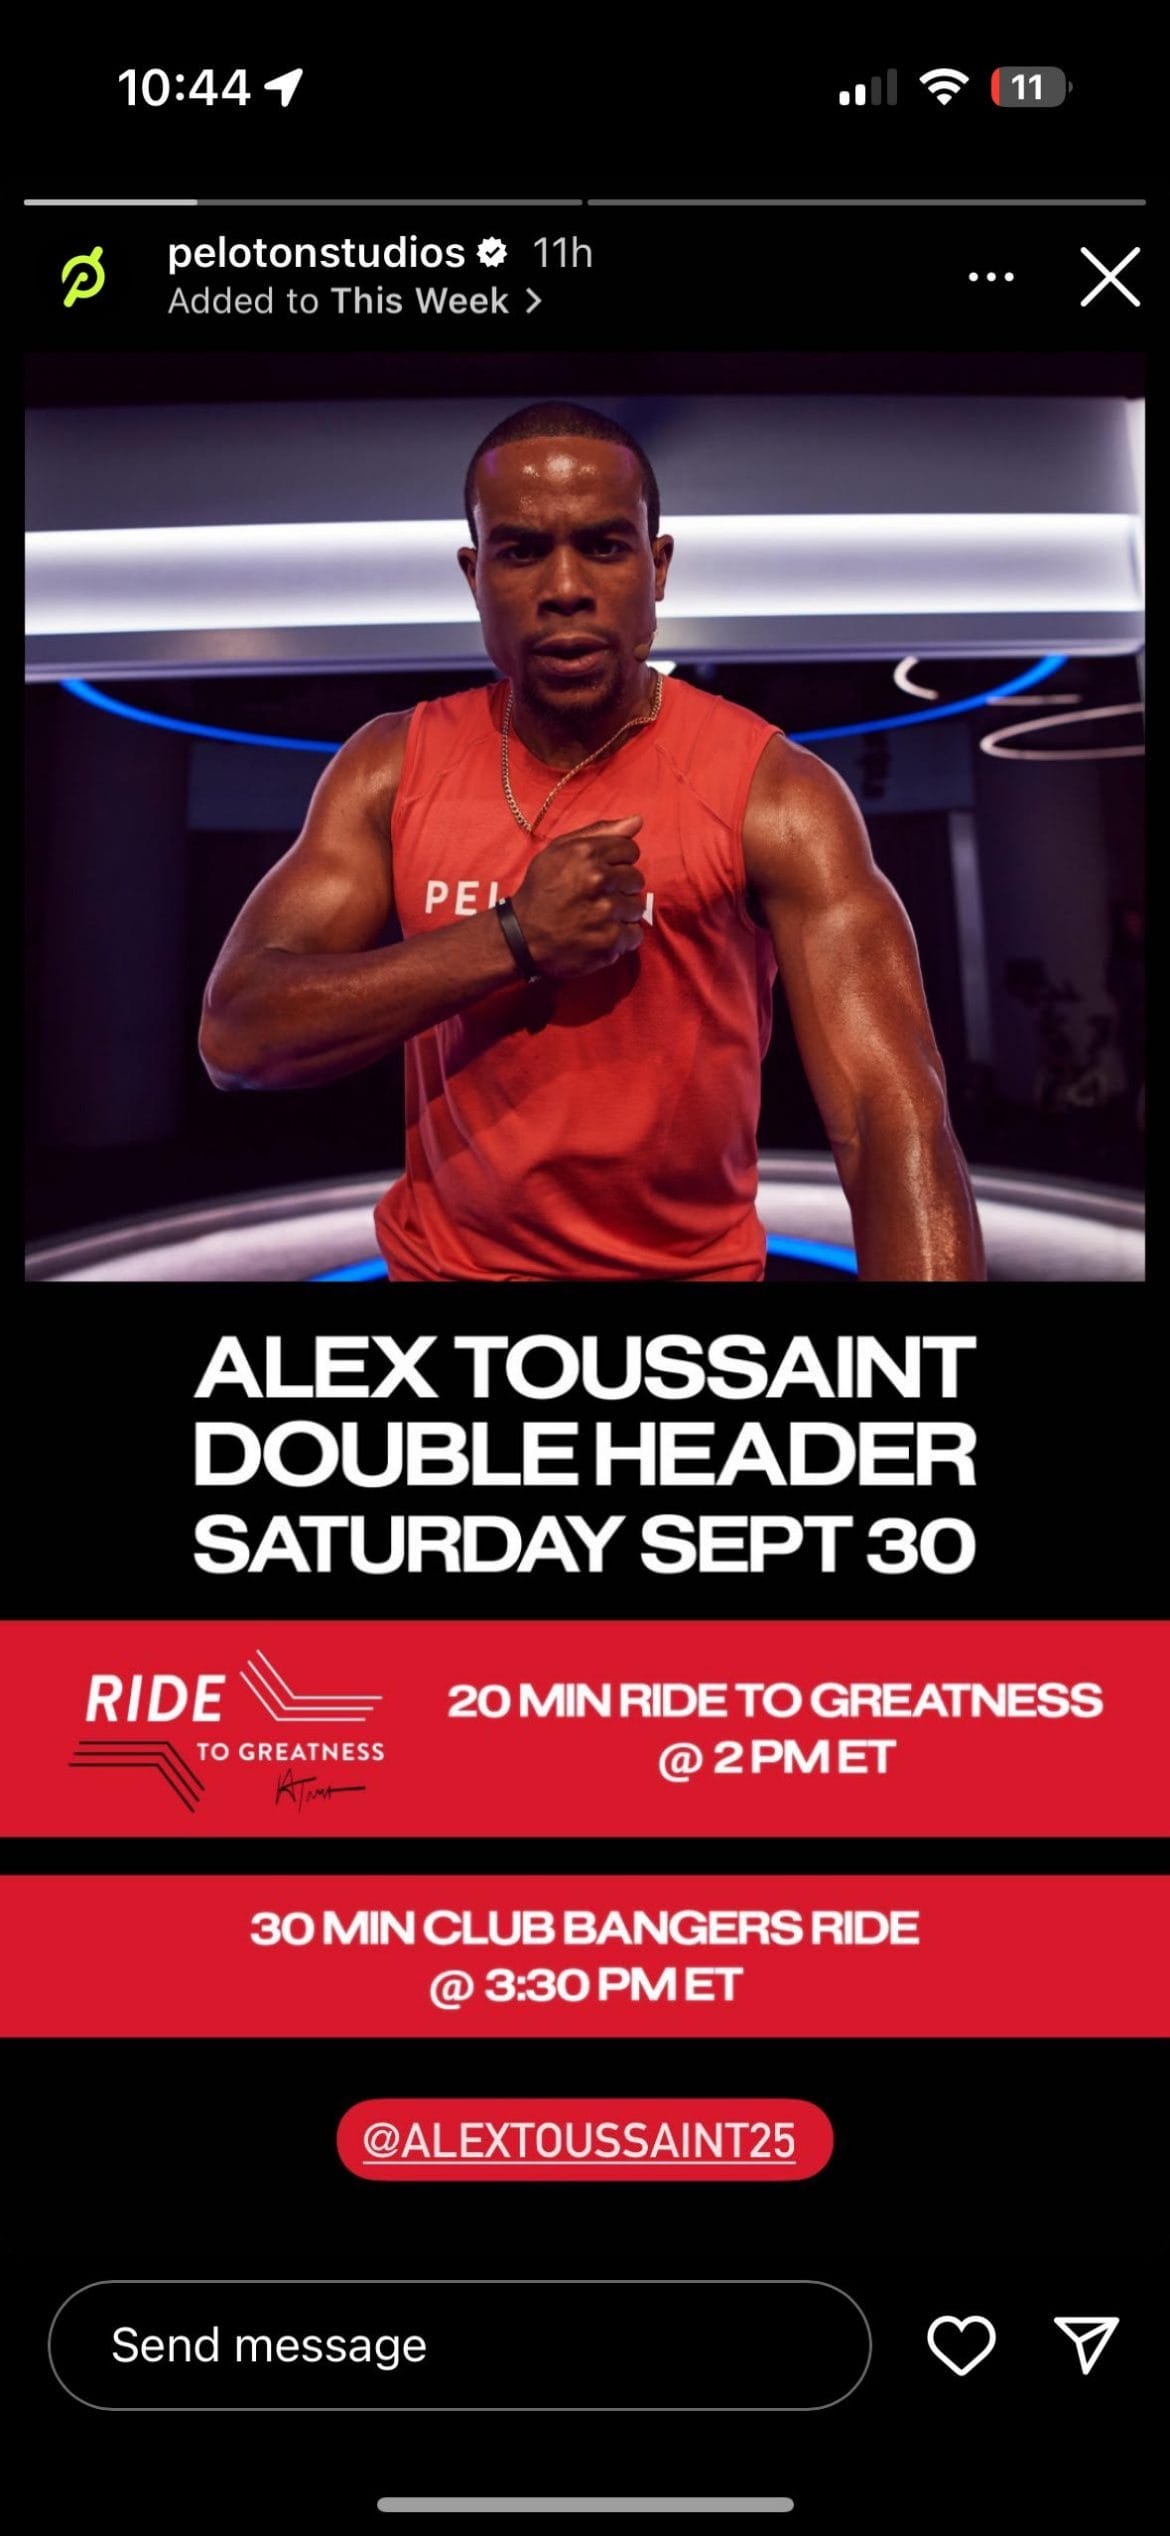 @PelotonStudios Instagram post announcing Ride to Greatness and Club Bangers double header.